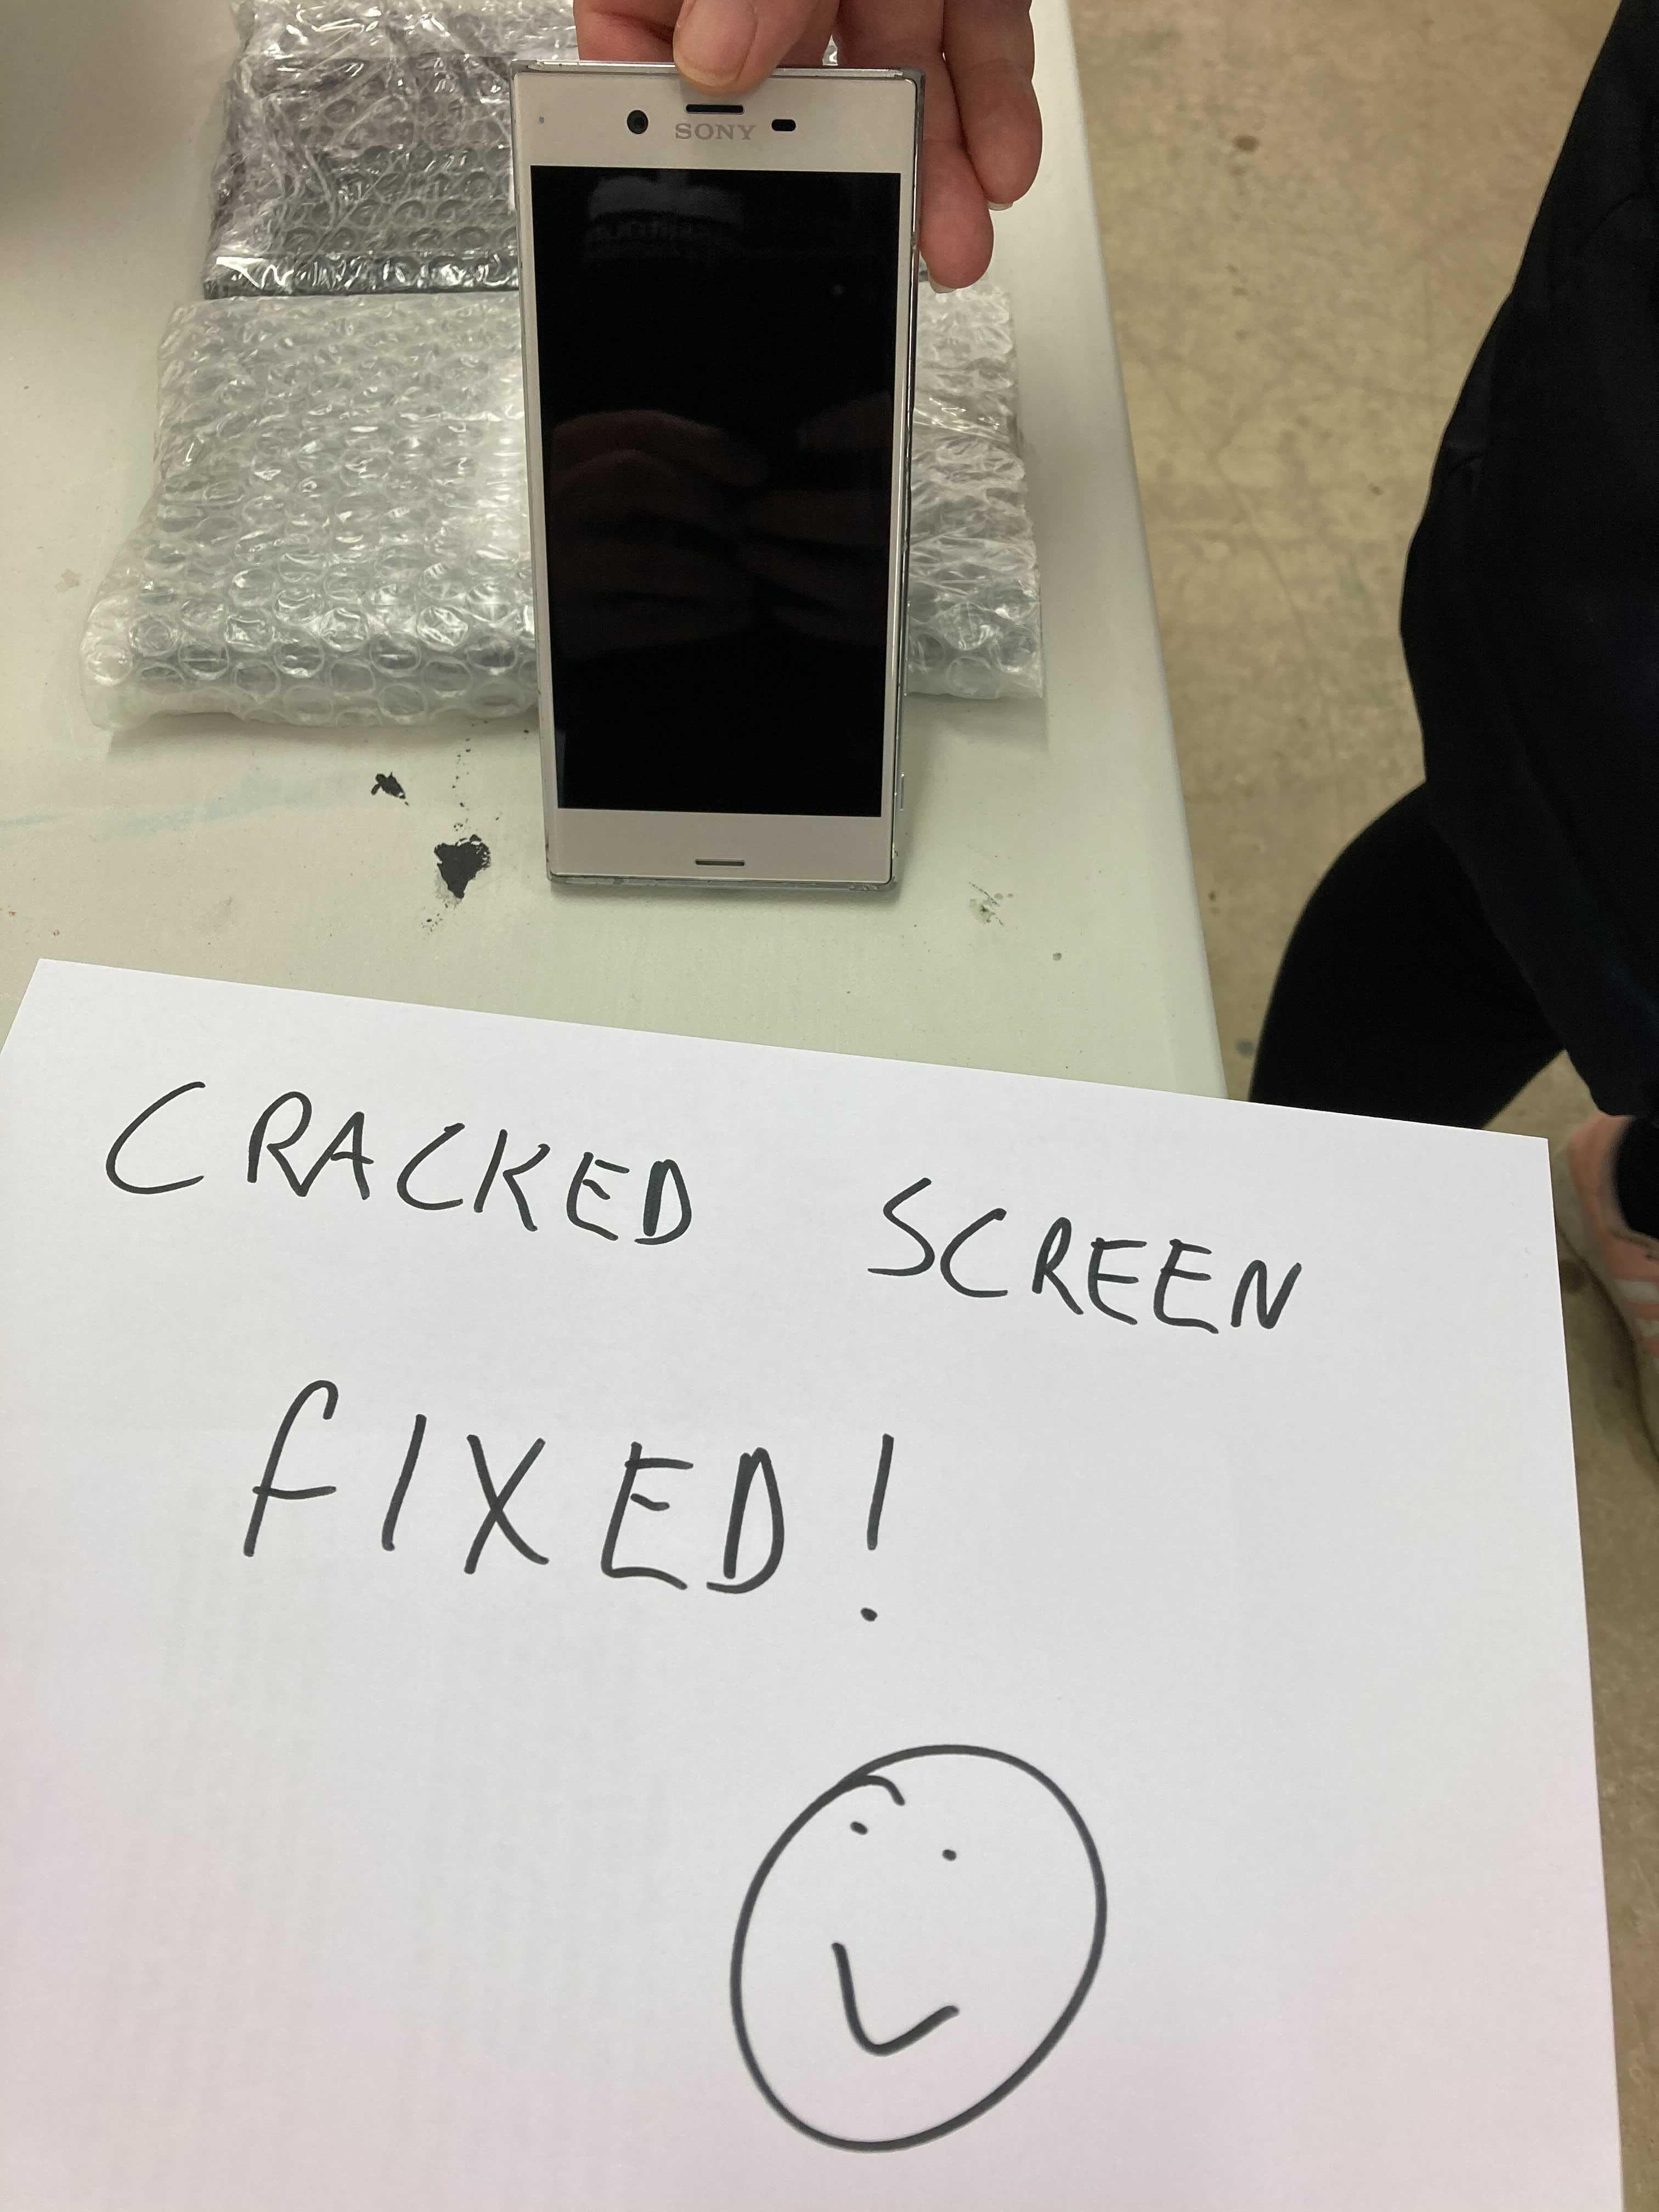 Digiknow Cracked Screen Fixed